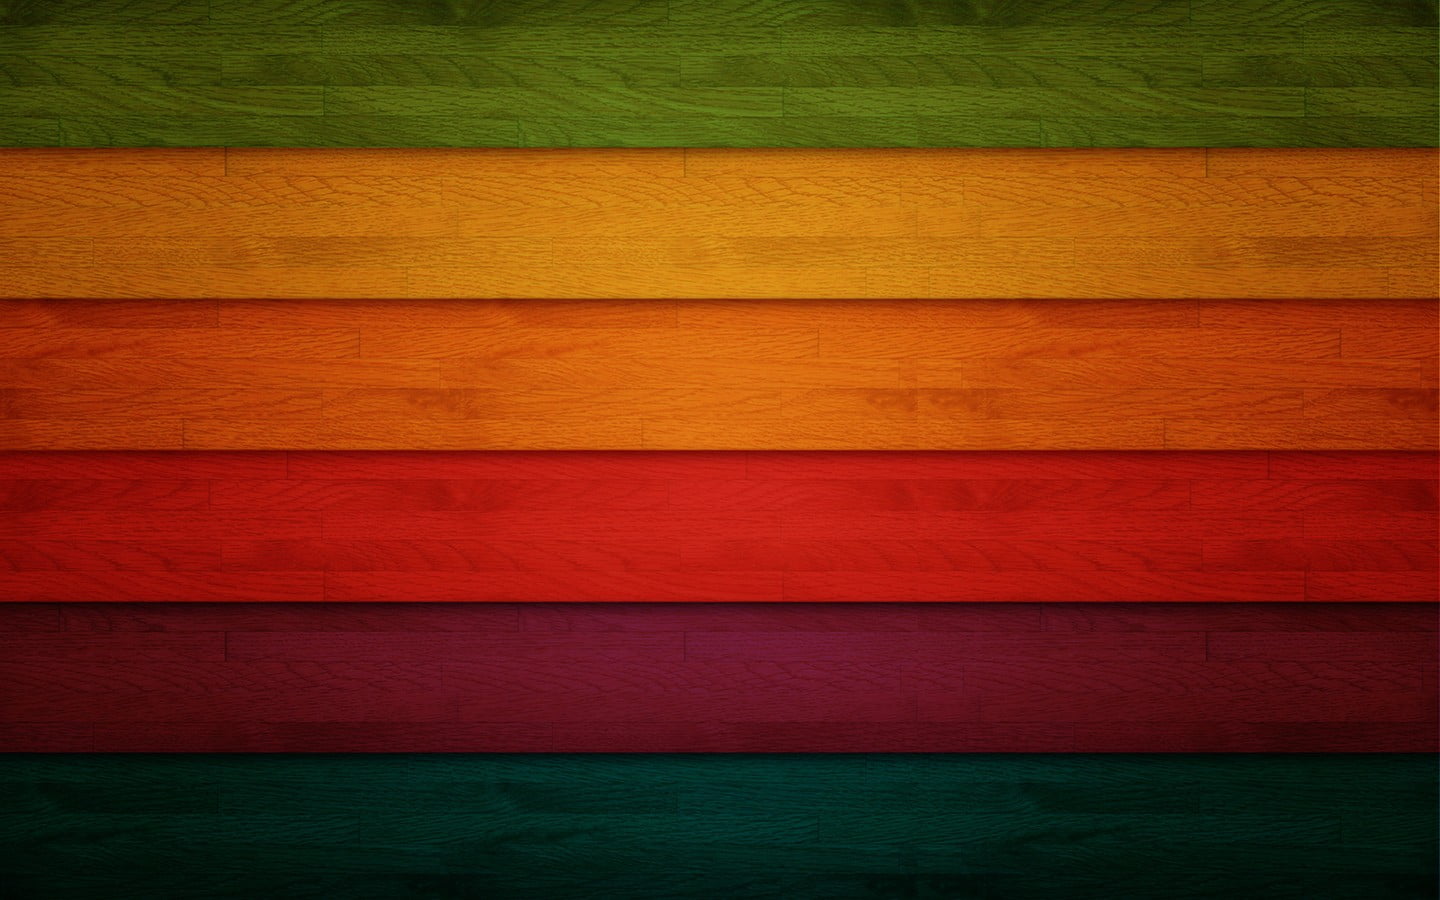 texture, minimalism, wooden surface, colorful, full frame, backgrounds